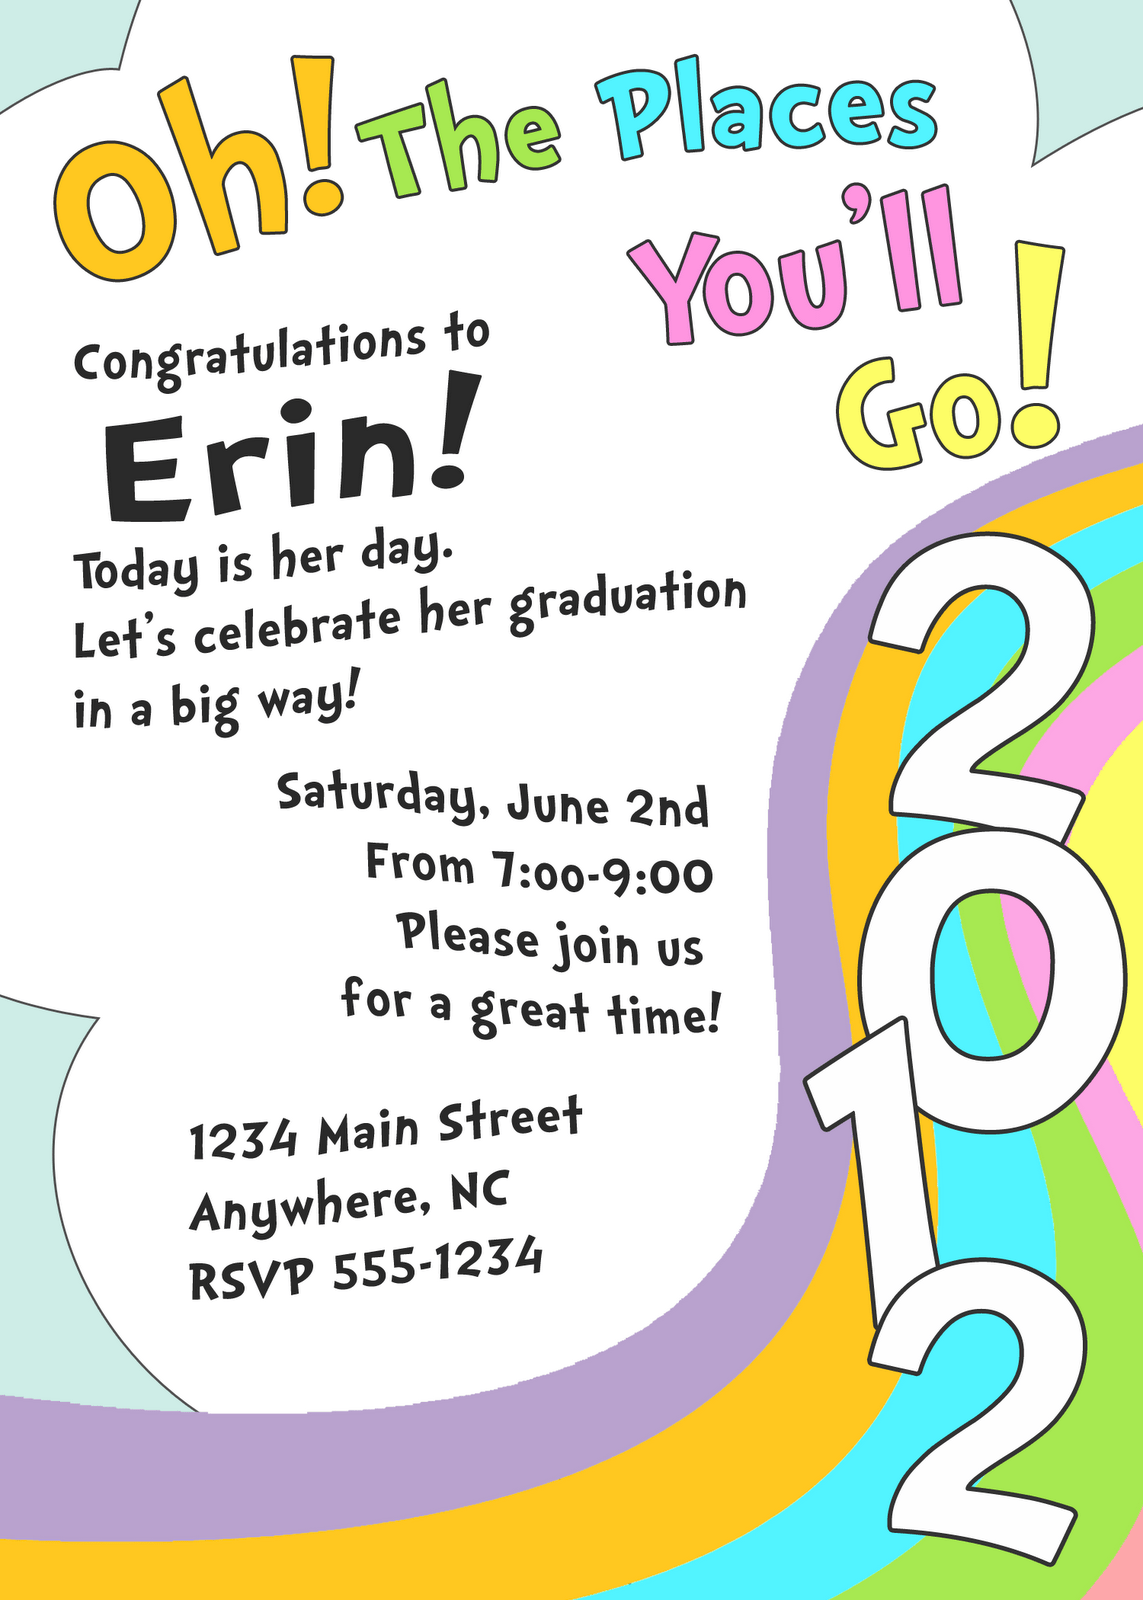 Meghily s Oh The Places You ll Go Graduation Invite Graduation Invitations Template Graduation Party Invitations Templates Graduation Invitations